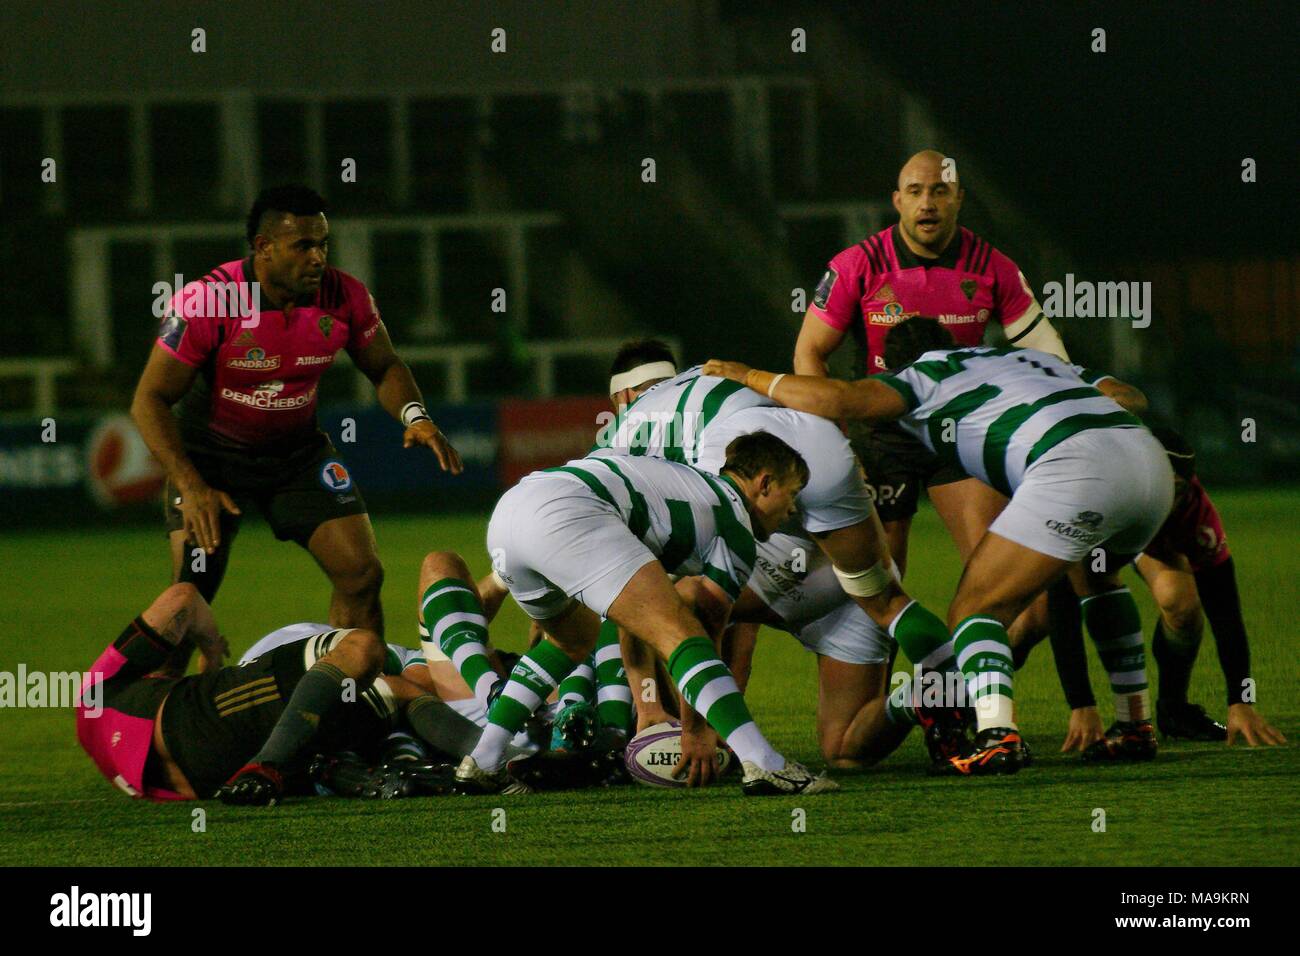 Newcastle upon Tyne, England, 30 March 2018. Sam Stuart, scrum half, picking the ball up for Newcastle Falcons against Brive in the European Challenge Cup quarter finals at Kingston Park. Credit: Colin Edwards/Alamy Live News. Stock Photo